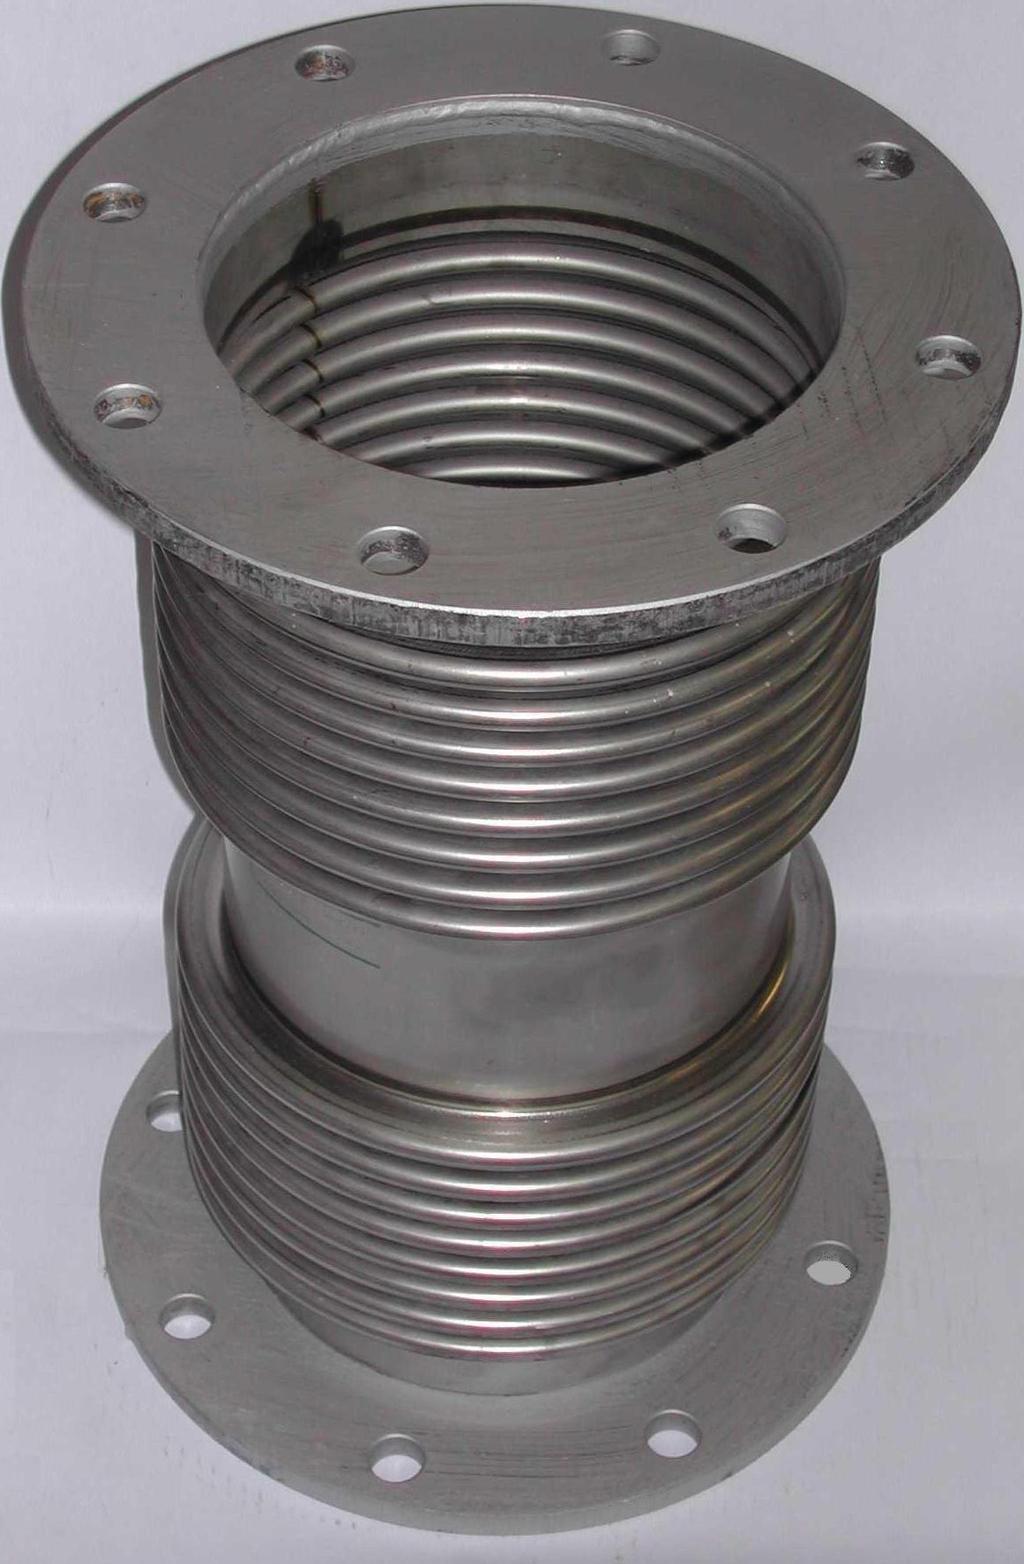 Cold-pull Bellows are designed for both compression and extension from their natural or free length.